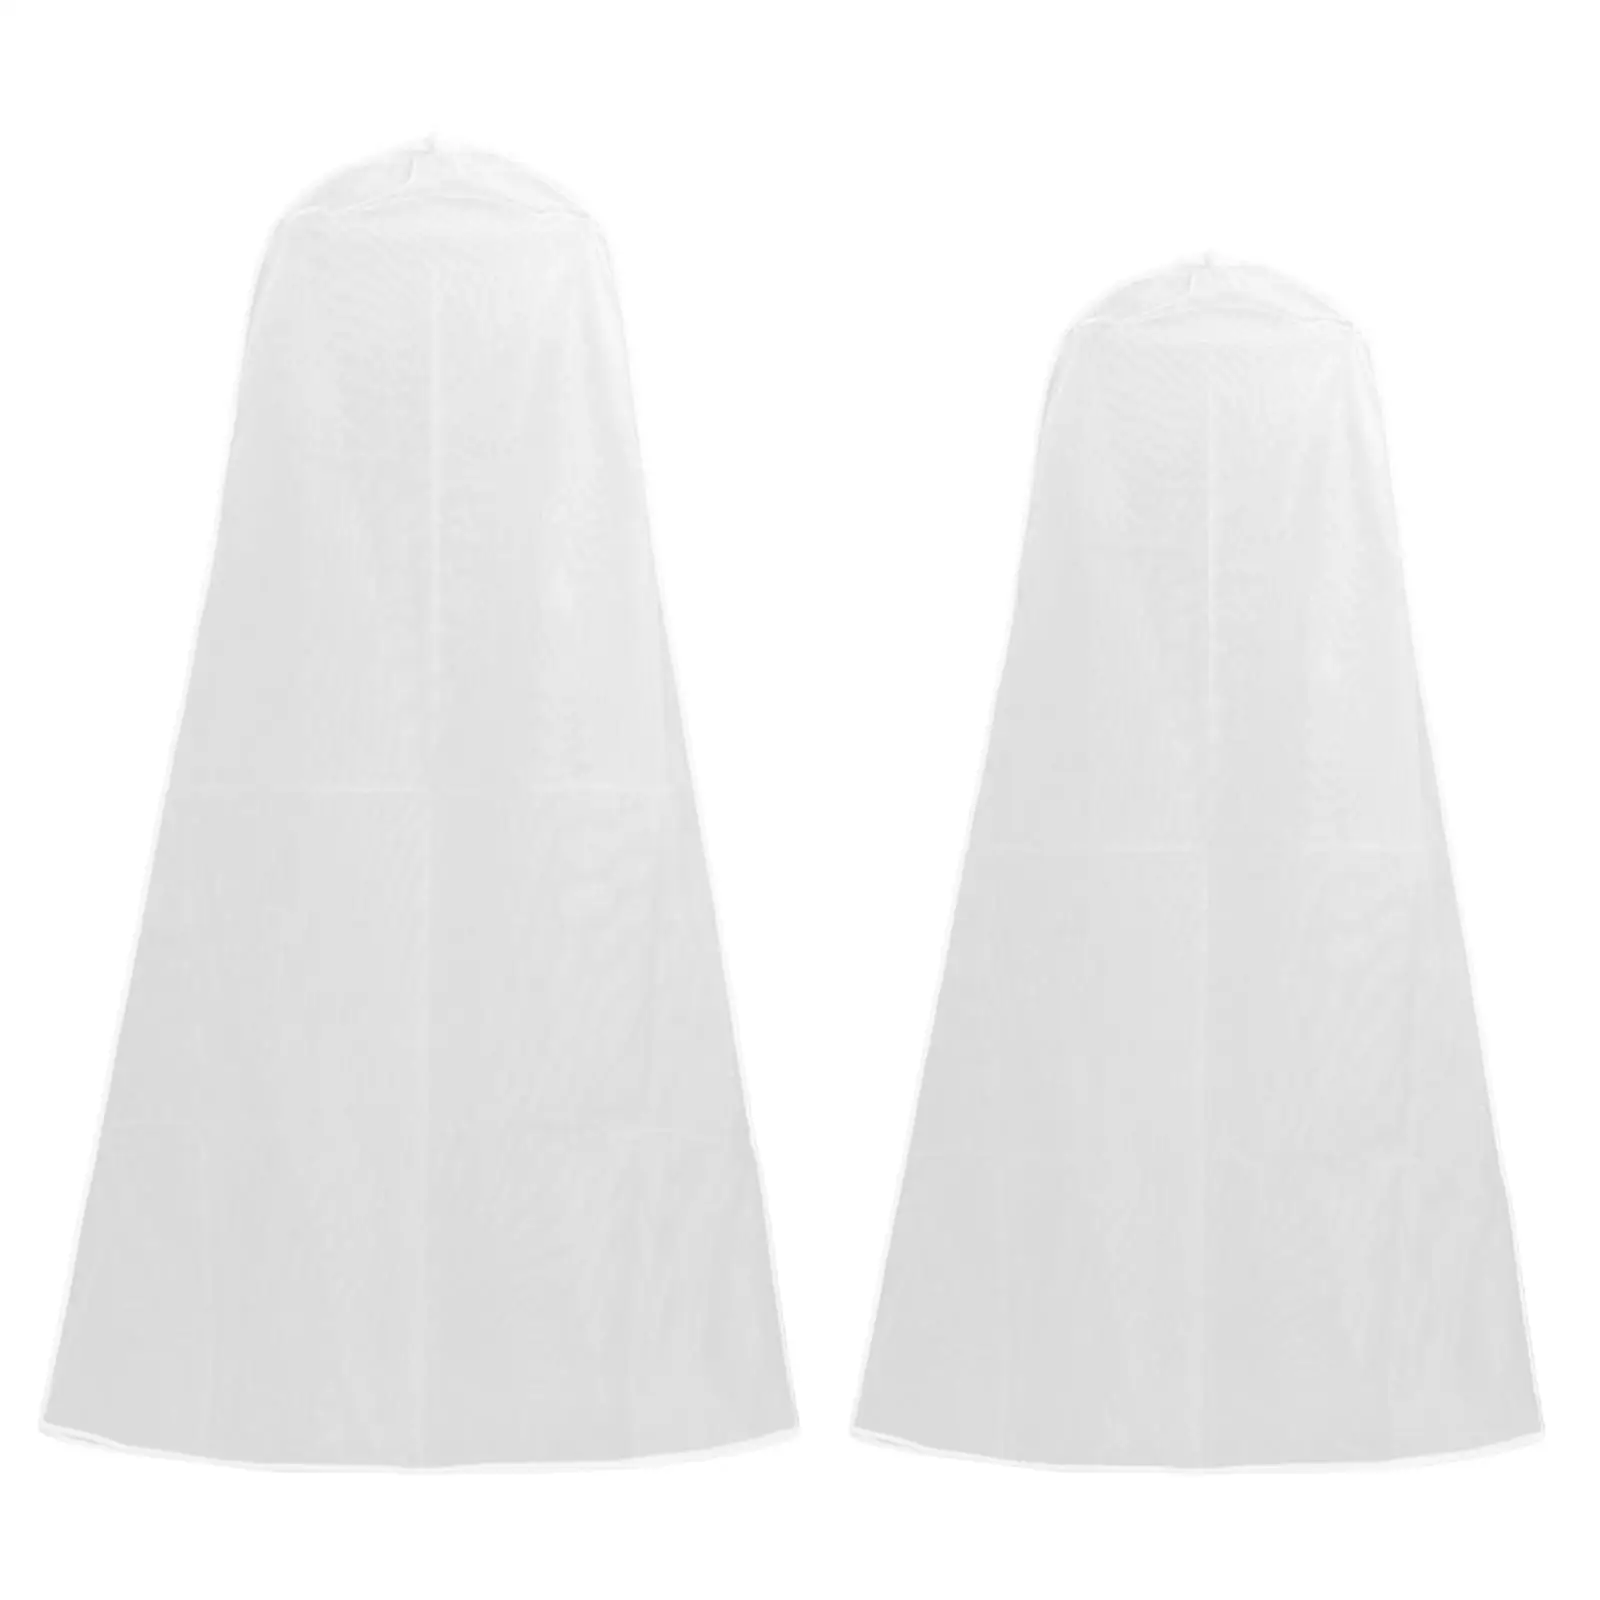 Wedding Dress Garment Bag Cover for Evening Gown Windbreakers Down Jackets